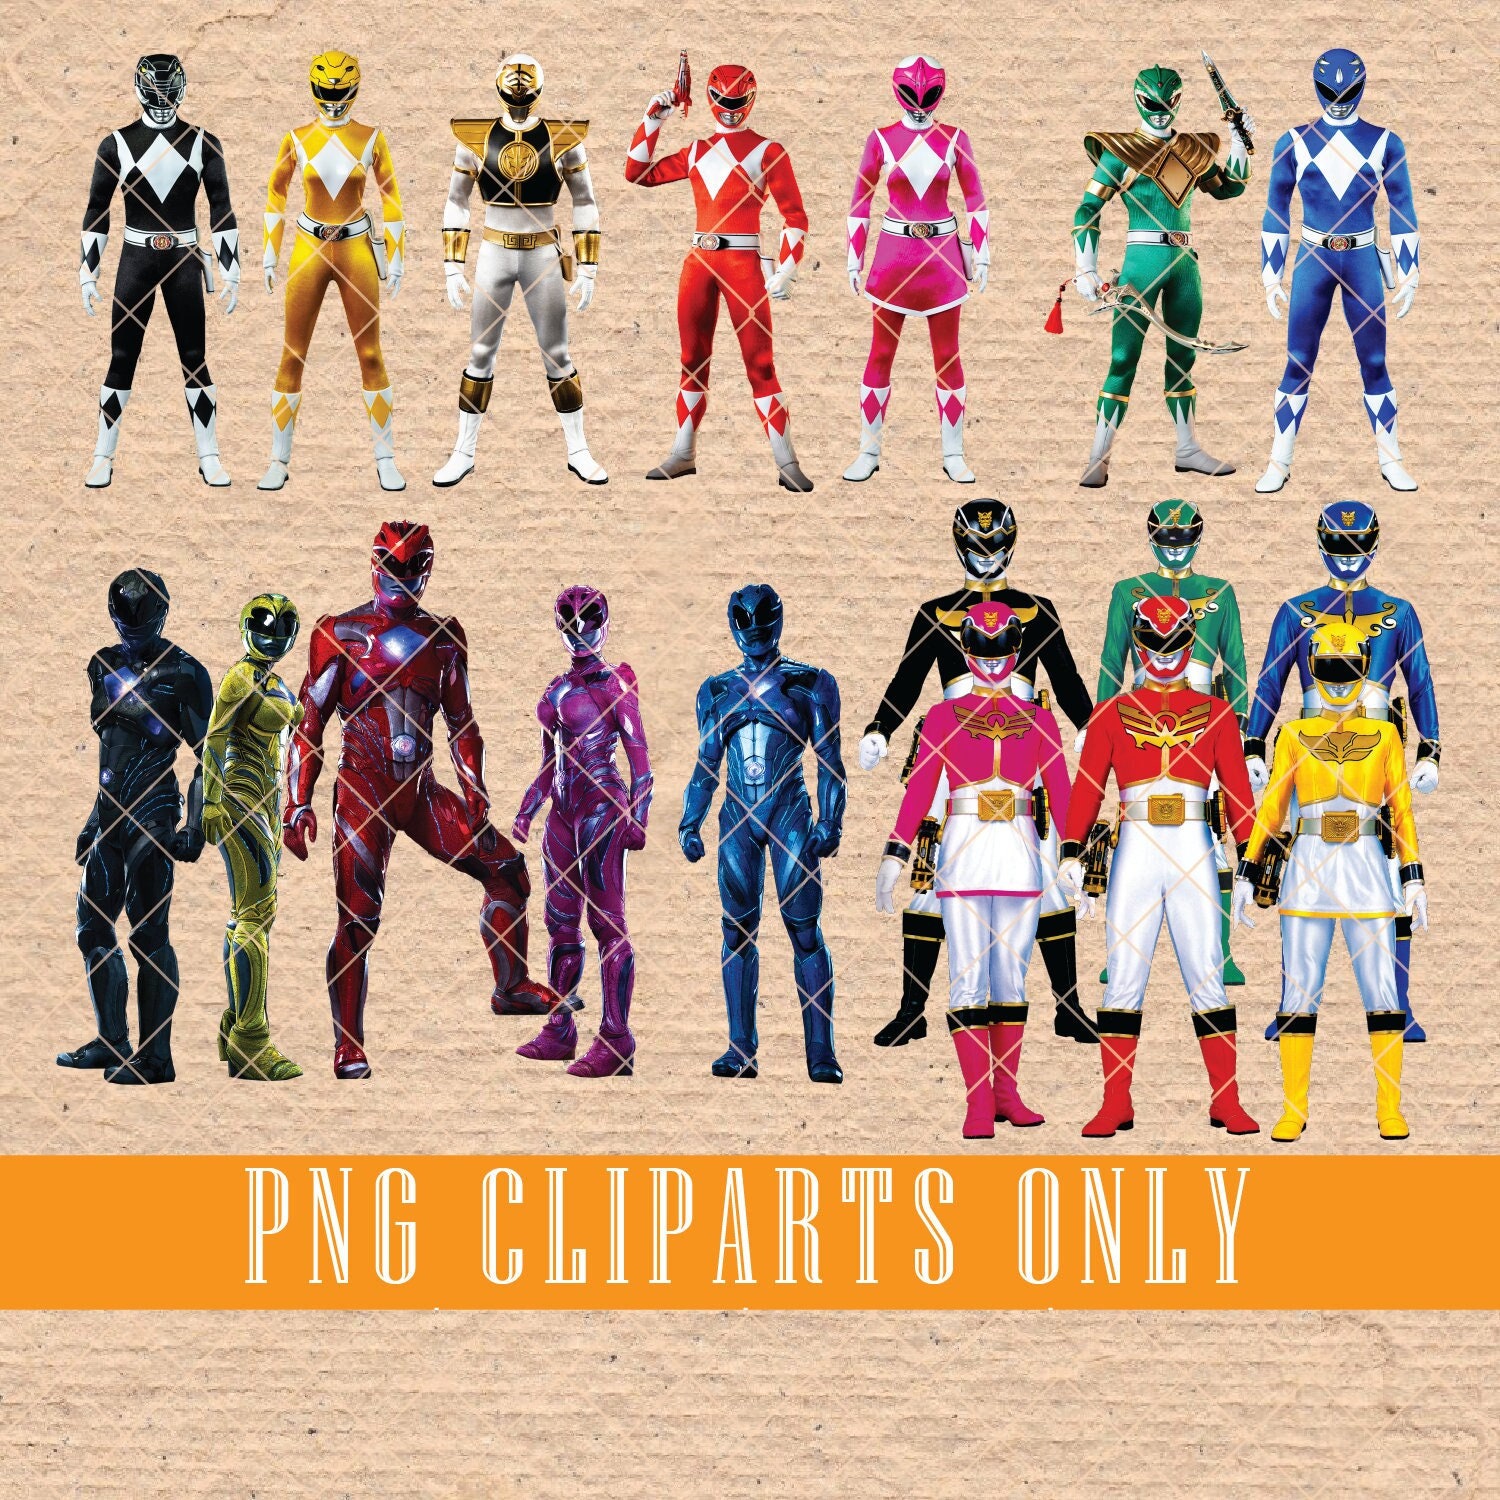 Power Rangers Cartoon Porn Galleries - Power Rangers Megaforce Images in PNG Transparent Background - Etsy